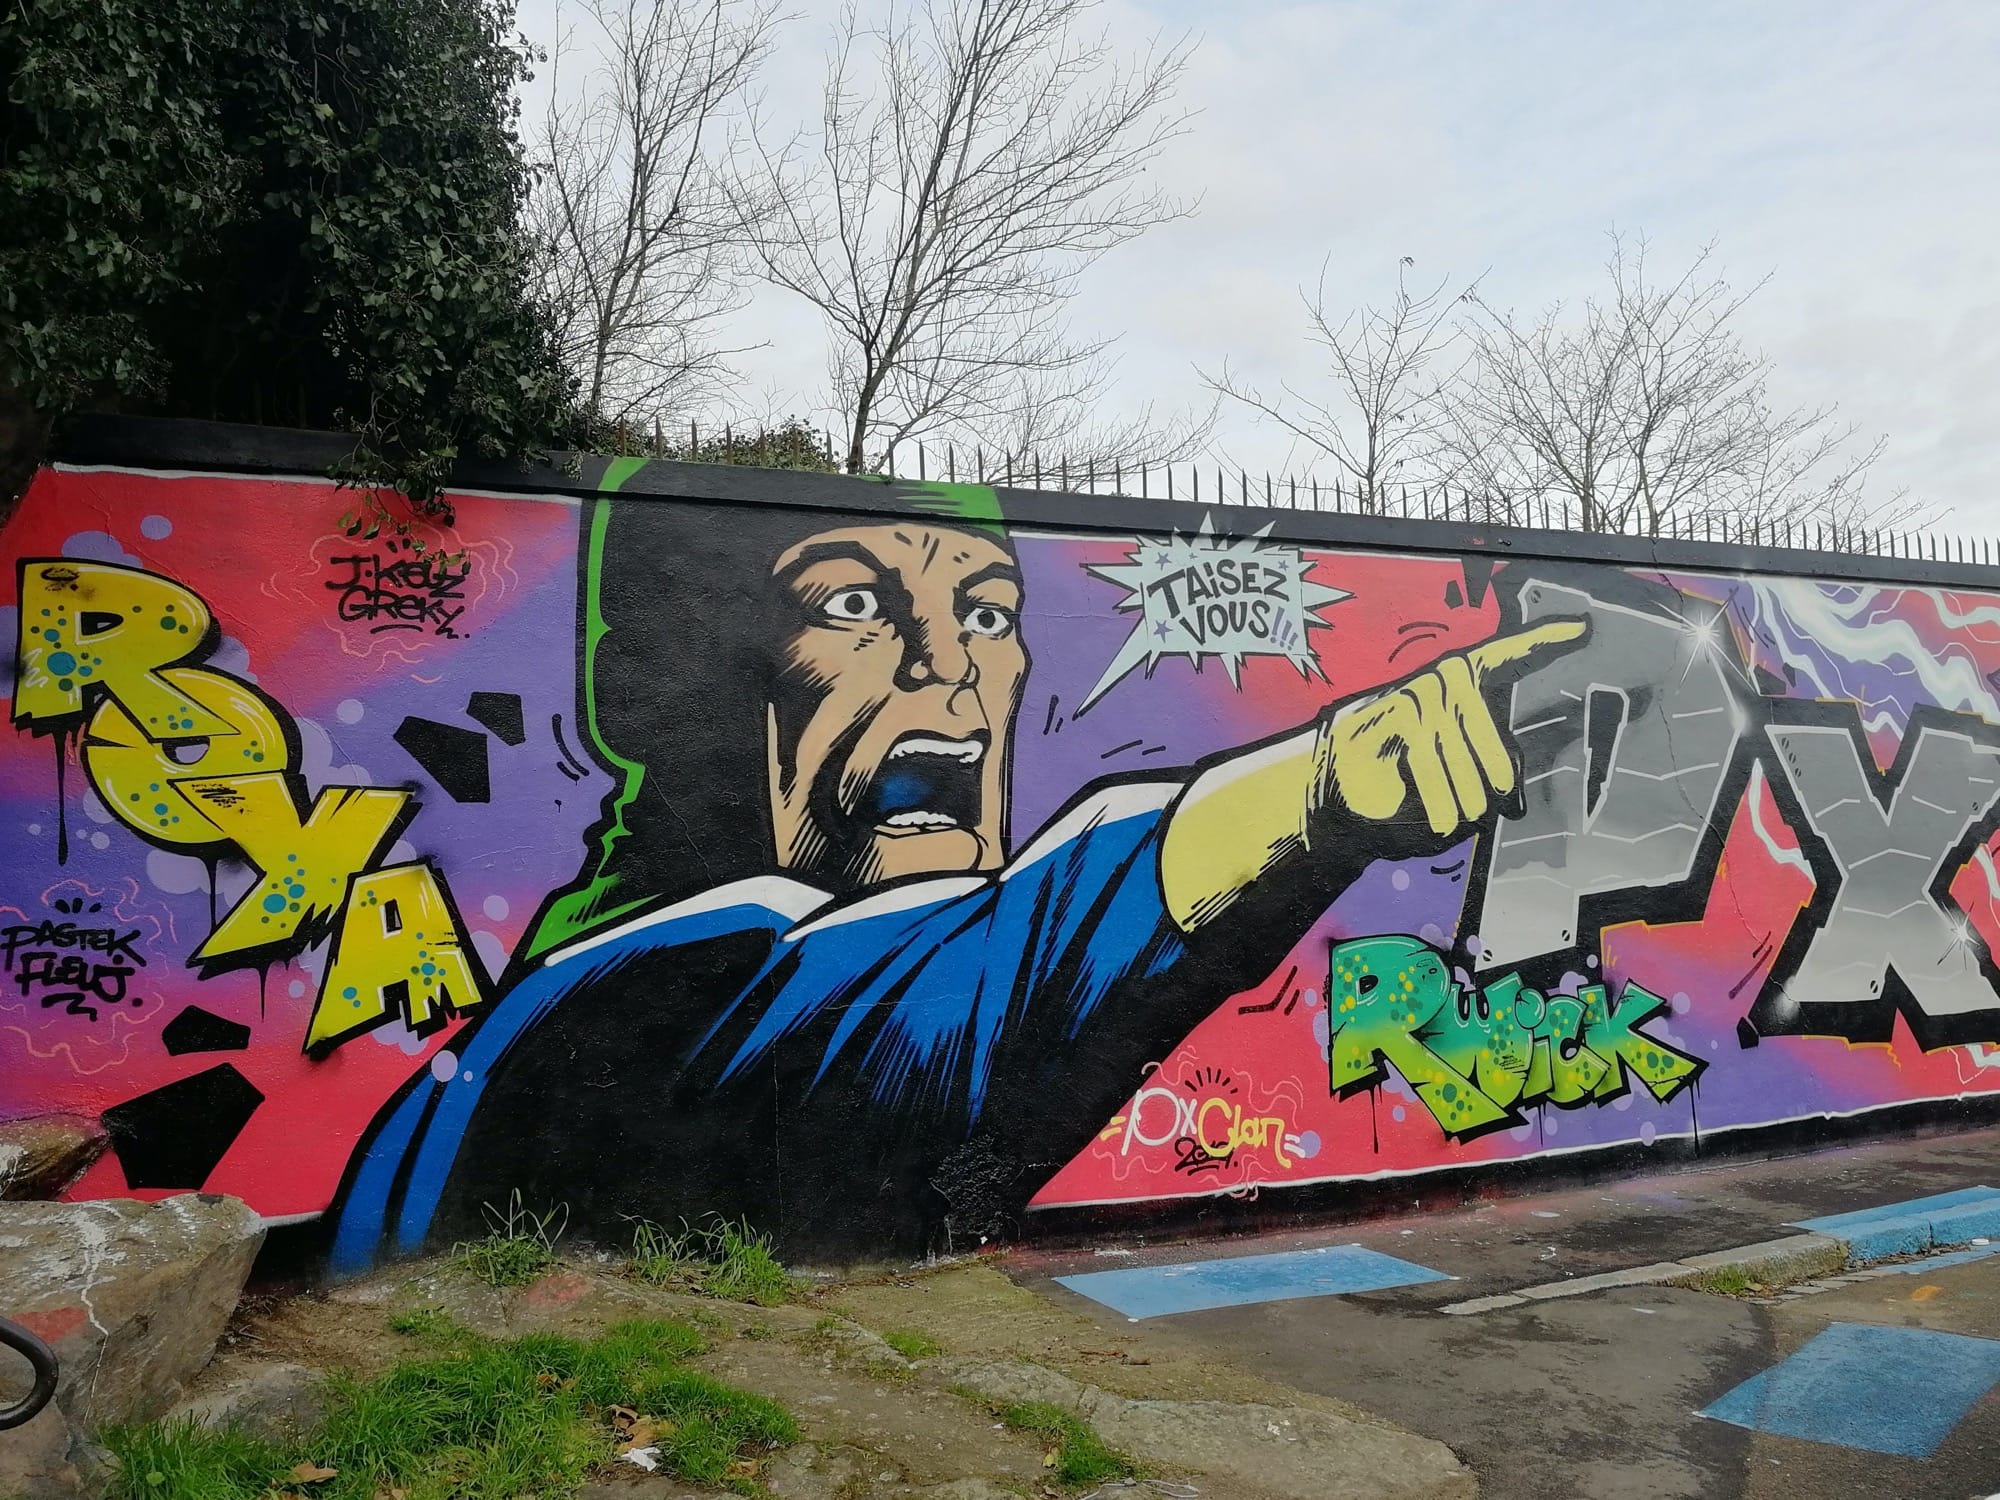 Graffiti 4031  captured by Rabot in Nantes France